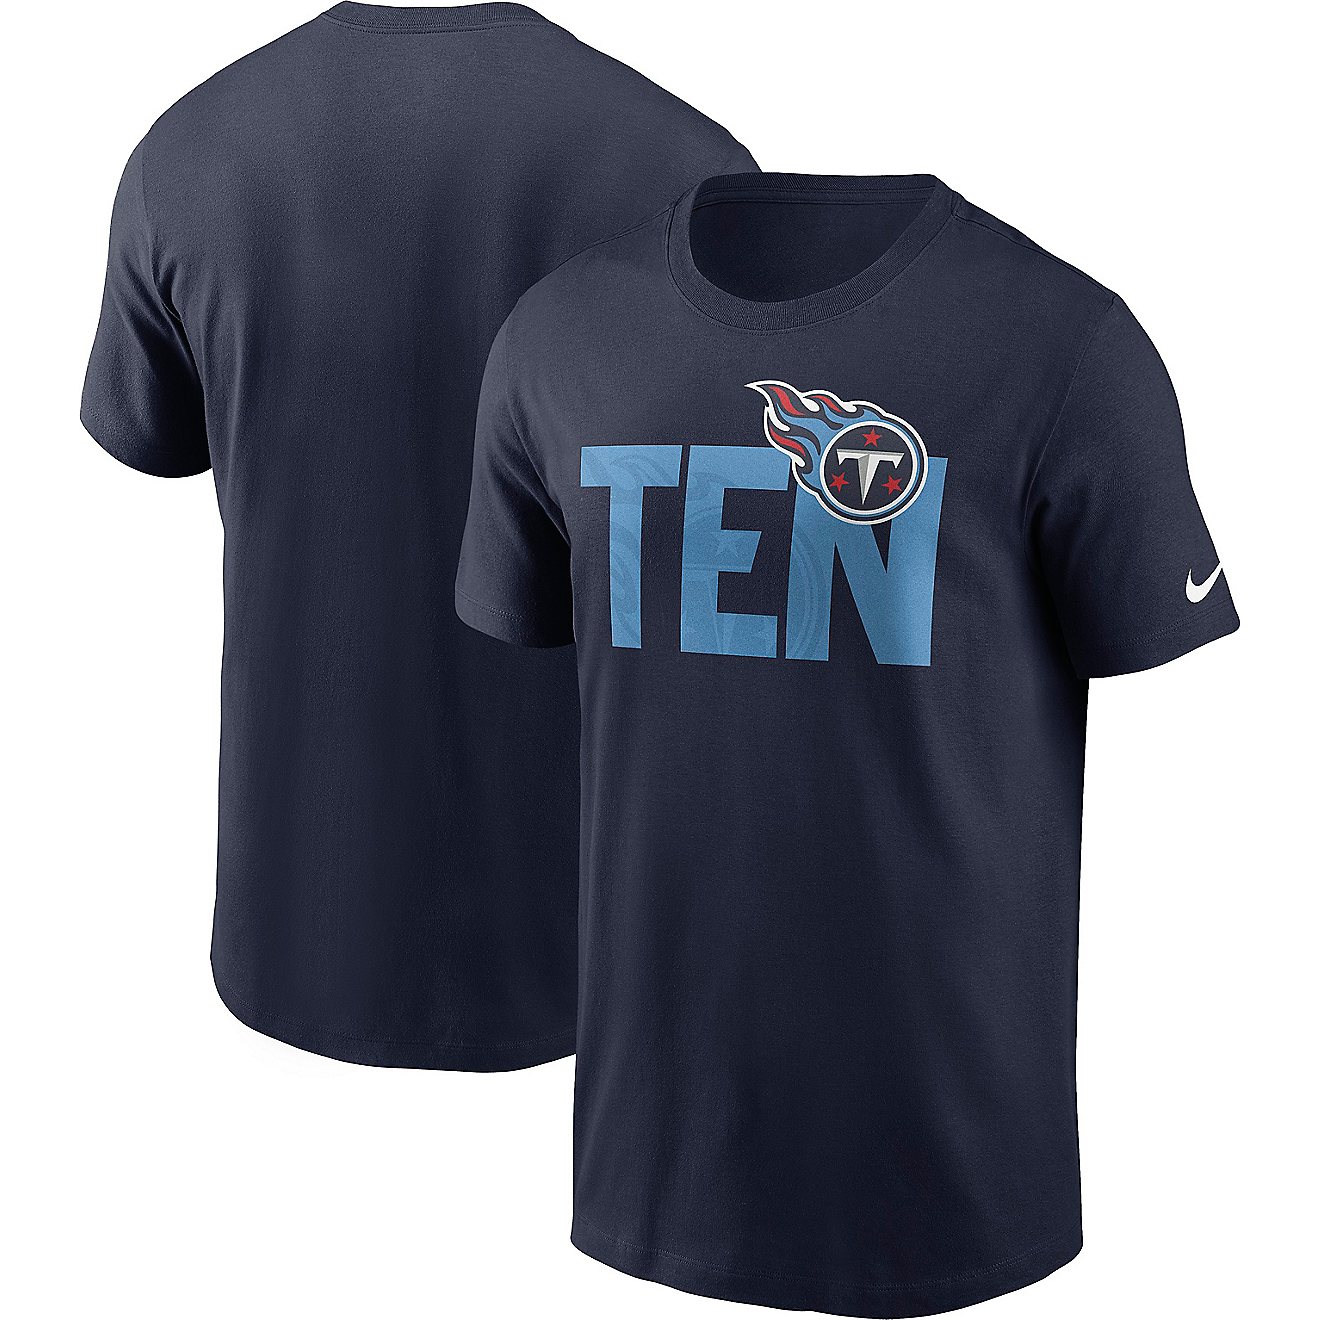 Nike Men's Tennessee Titans Local Essential Graphic T-shirt | Academy